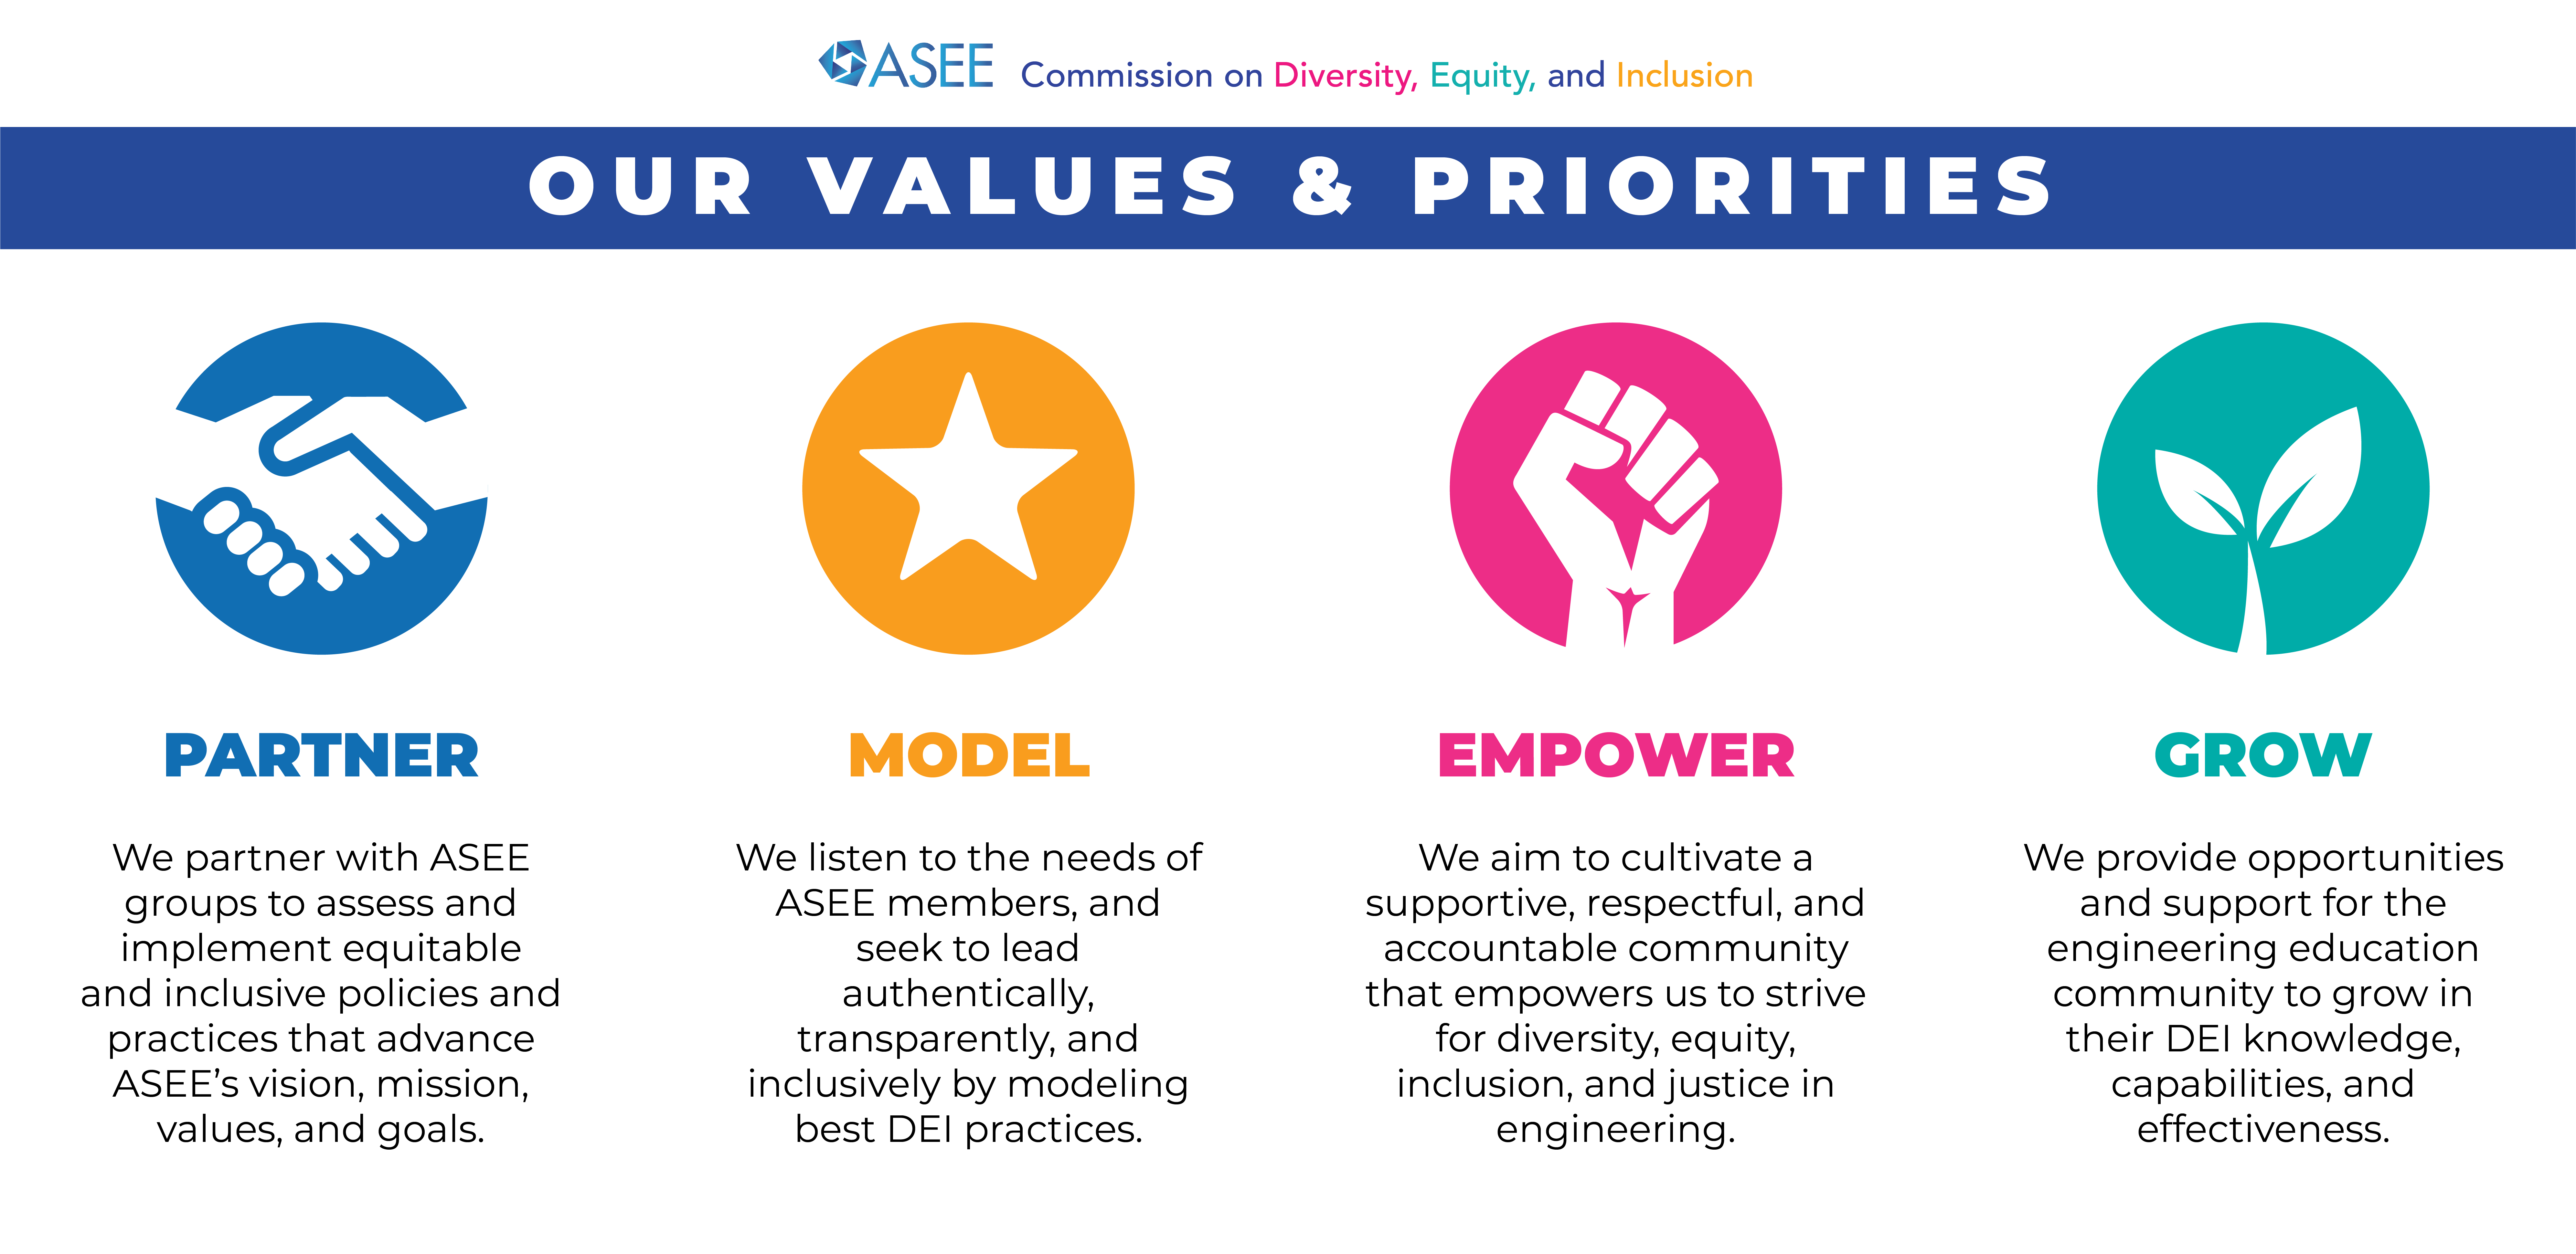 ASEE CDEI VALUES AND PRIORITIES 2022